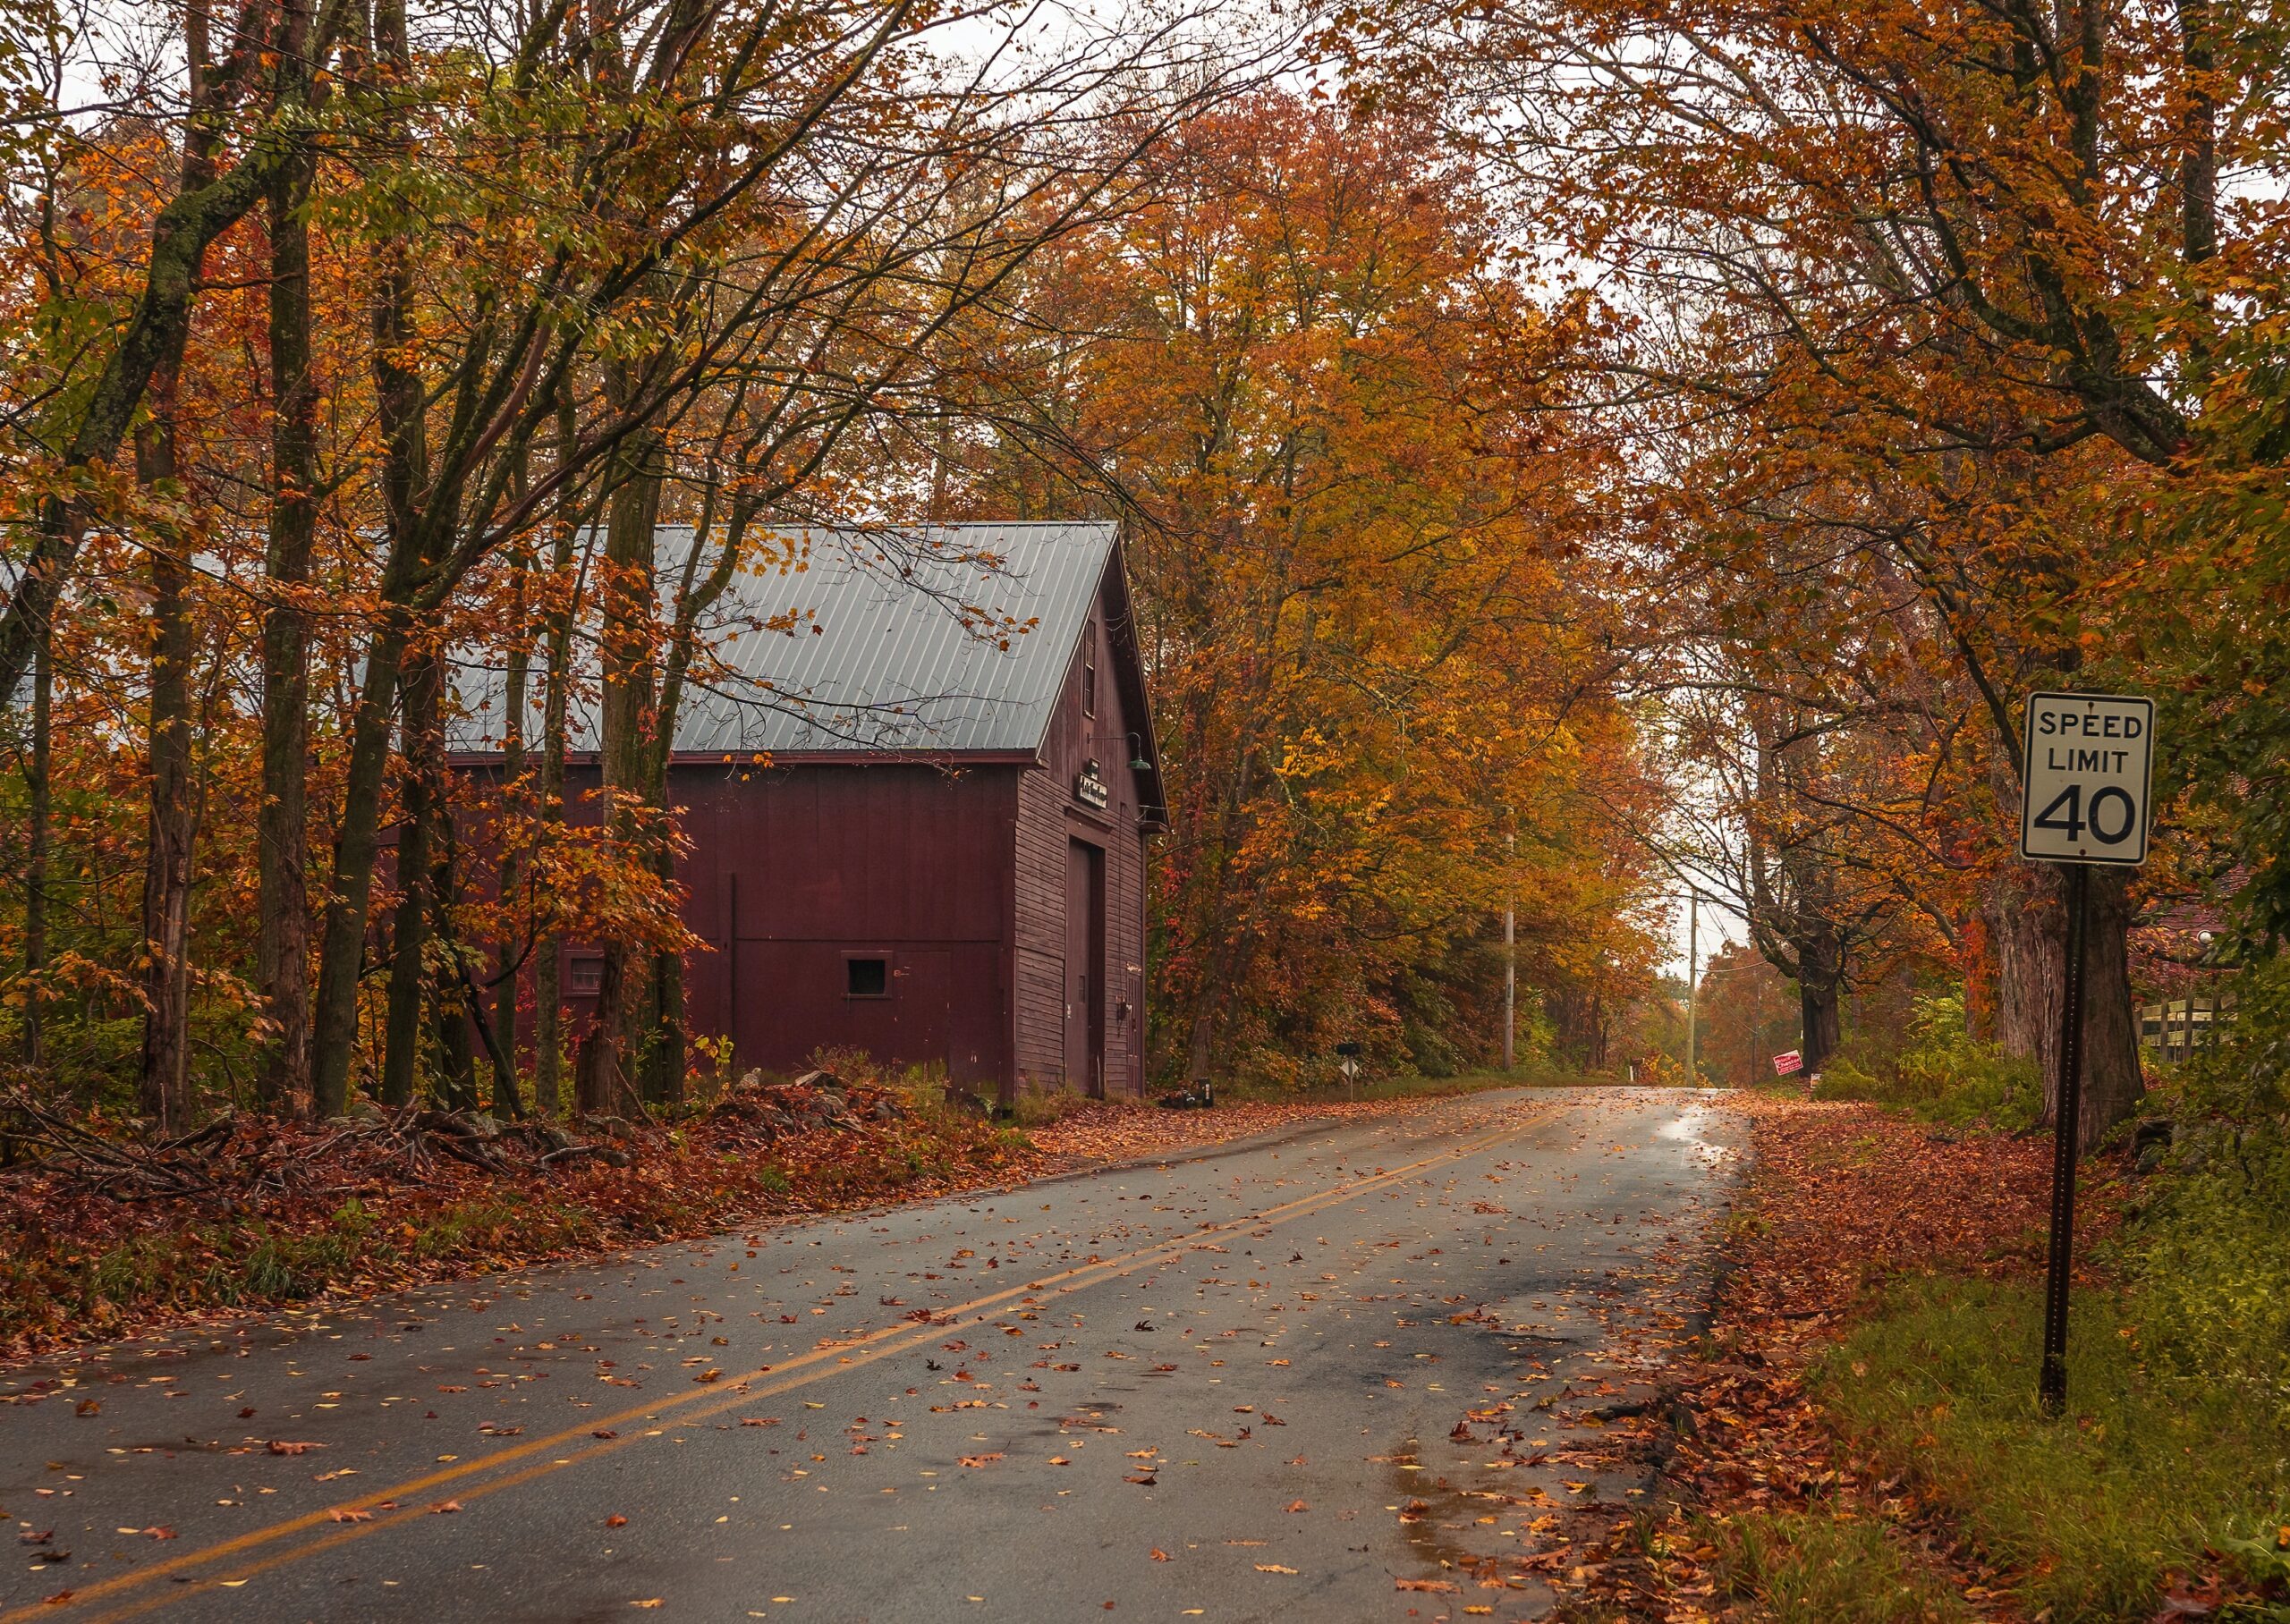 Massachusetts is a New England state with popular sites.
pictured: a Massachusetts back road covered with reddish fall leaves 